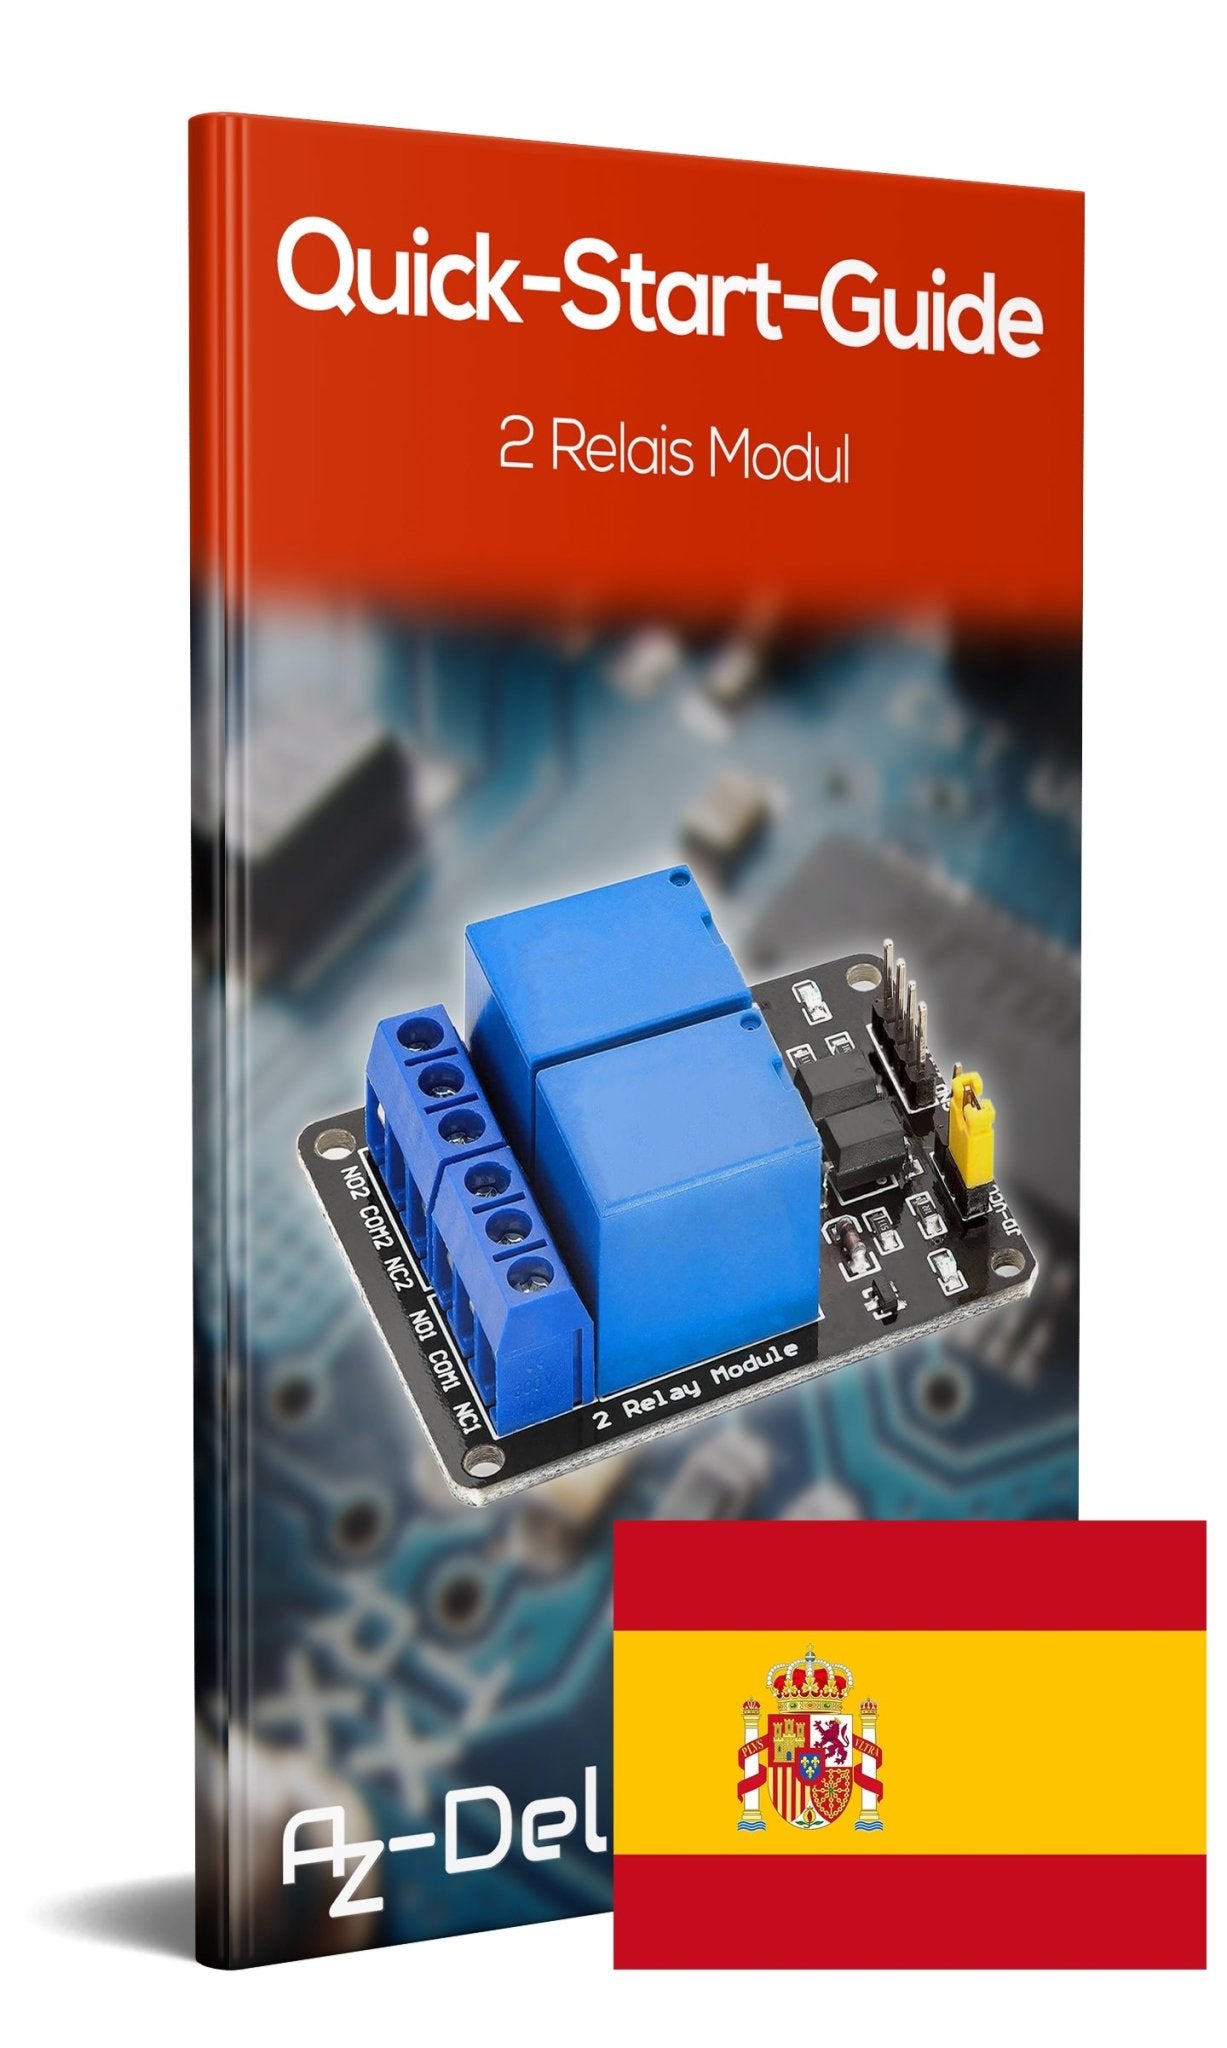 2-Channel Relay Module with Opto-isolator, 5V